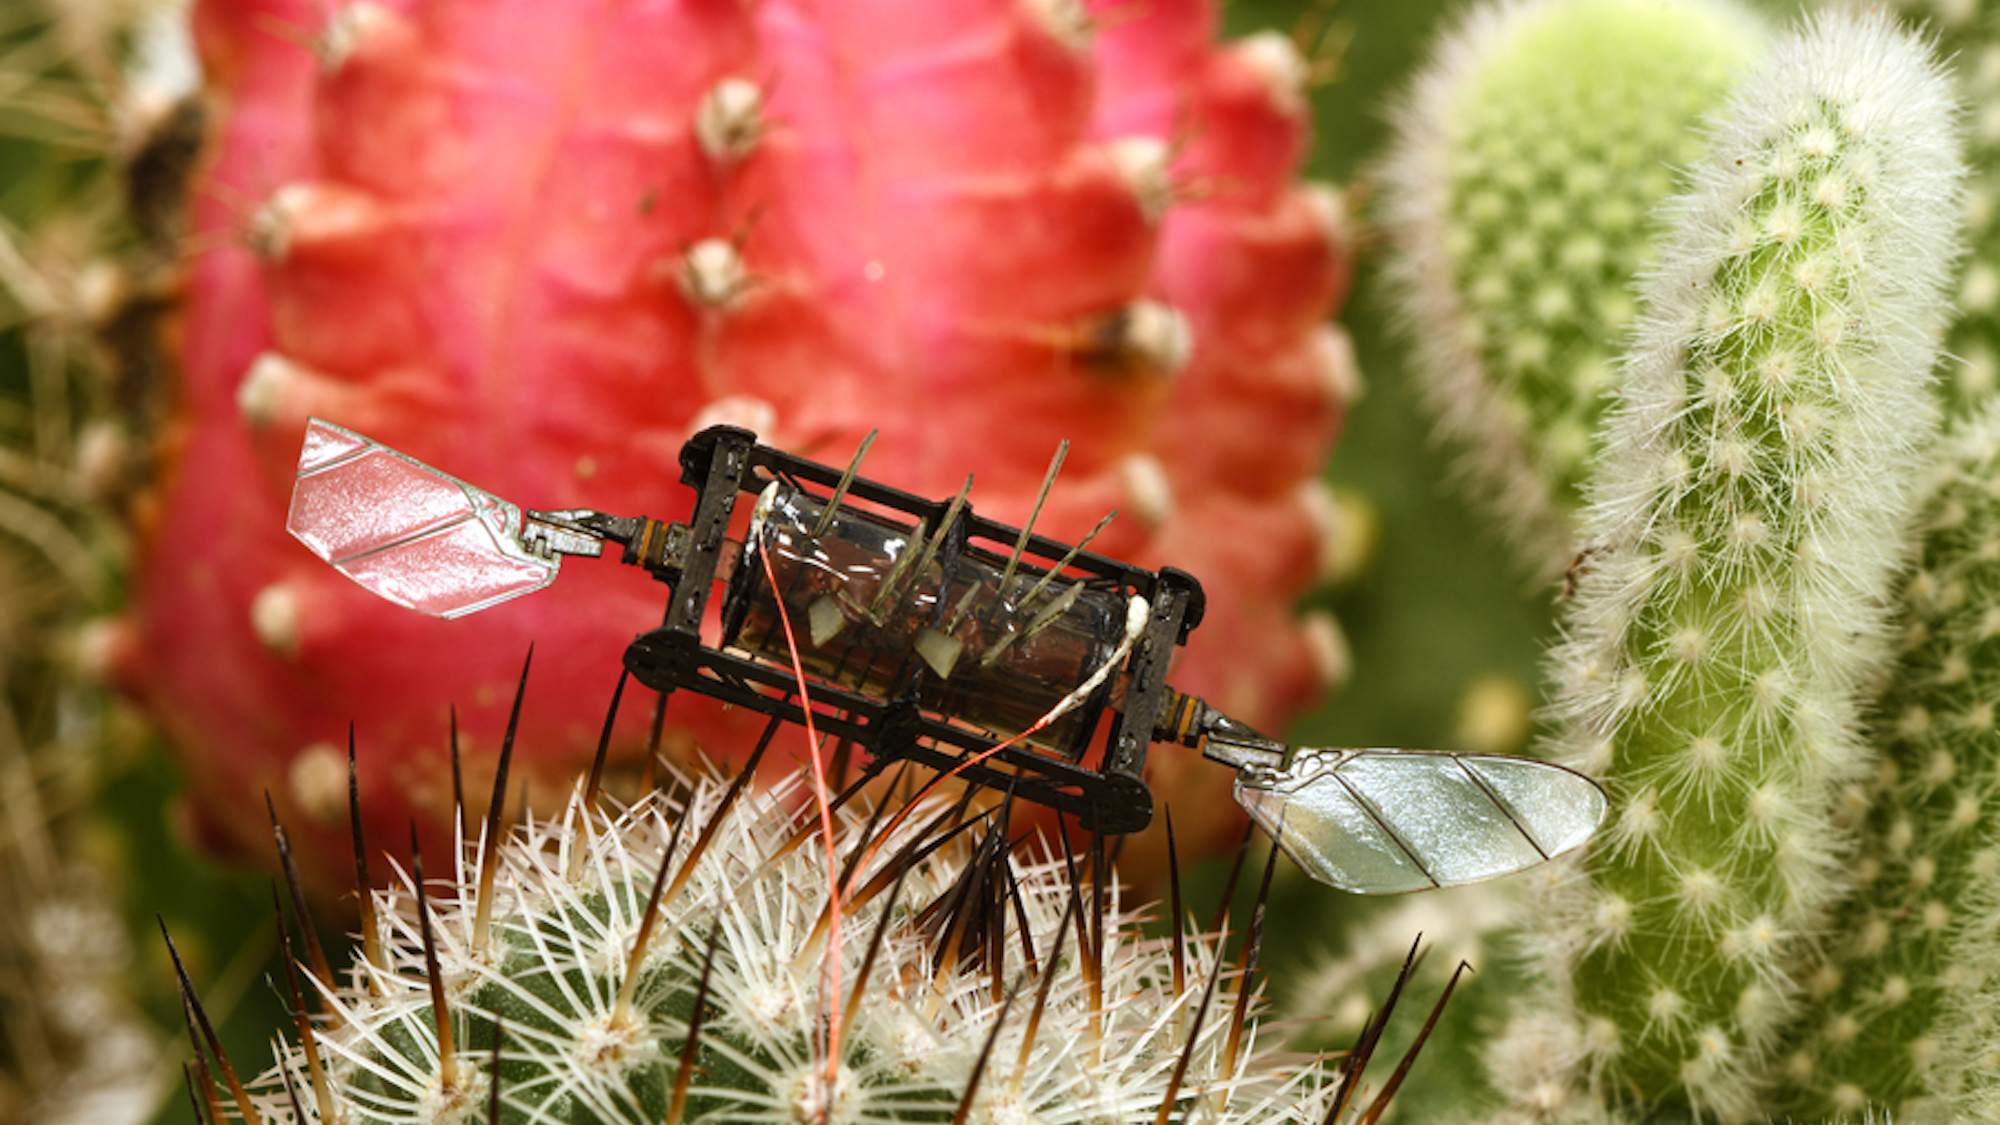 Small flying robot perched atop cactus